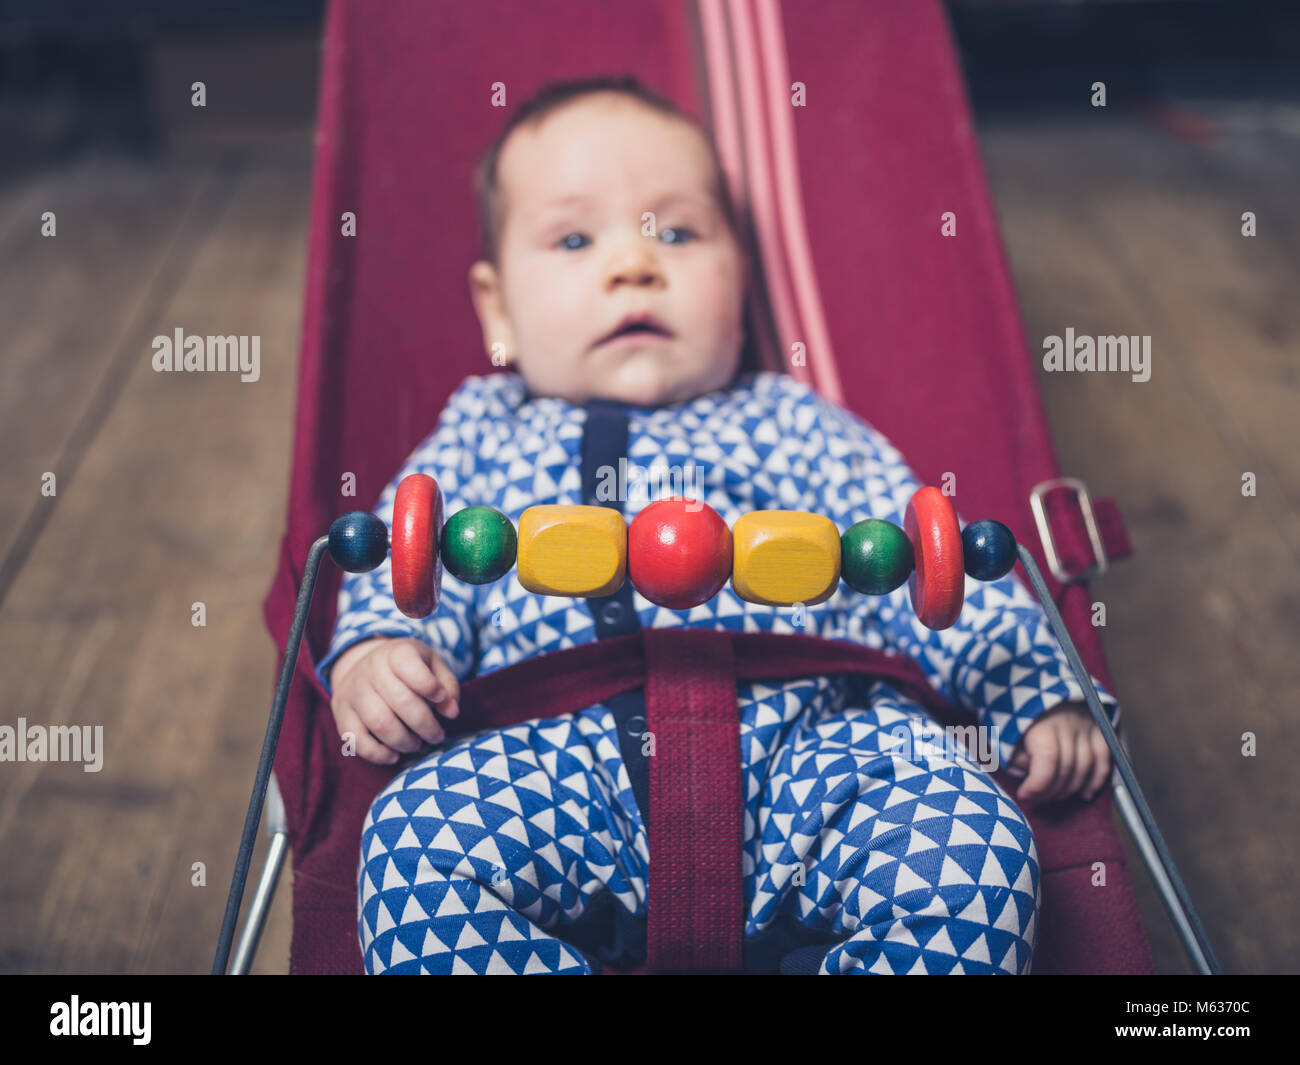 A baby is sitting in a vintage bouncy chair on the wooden floor Stock Photo